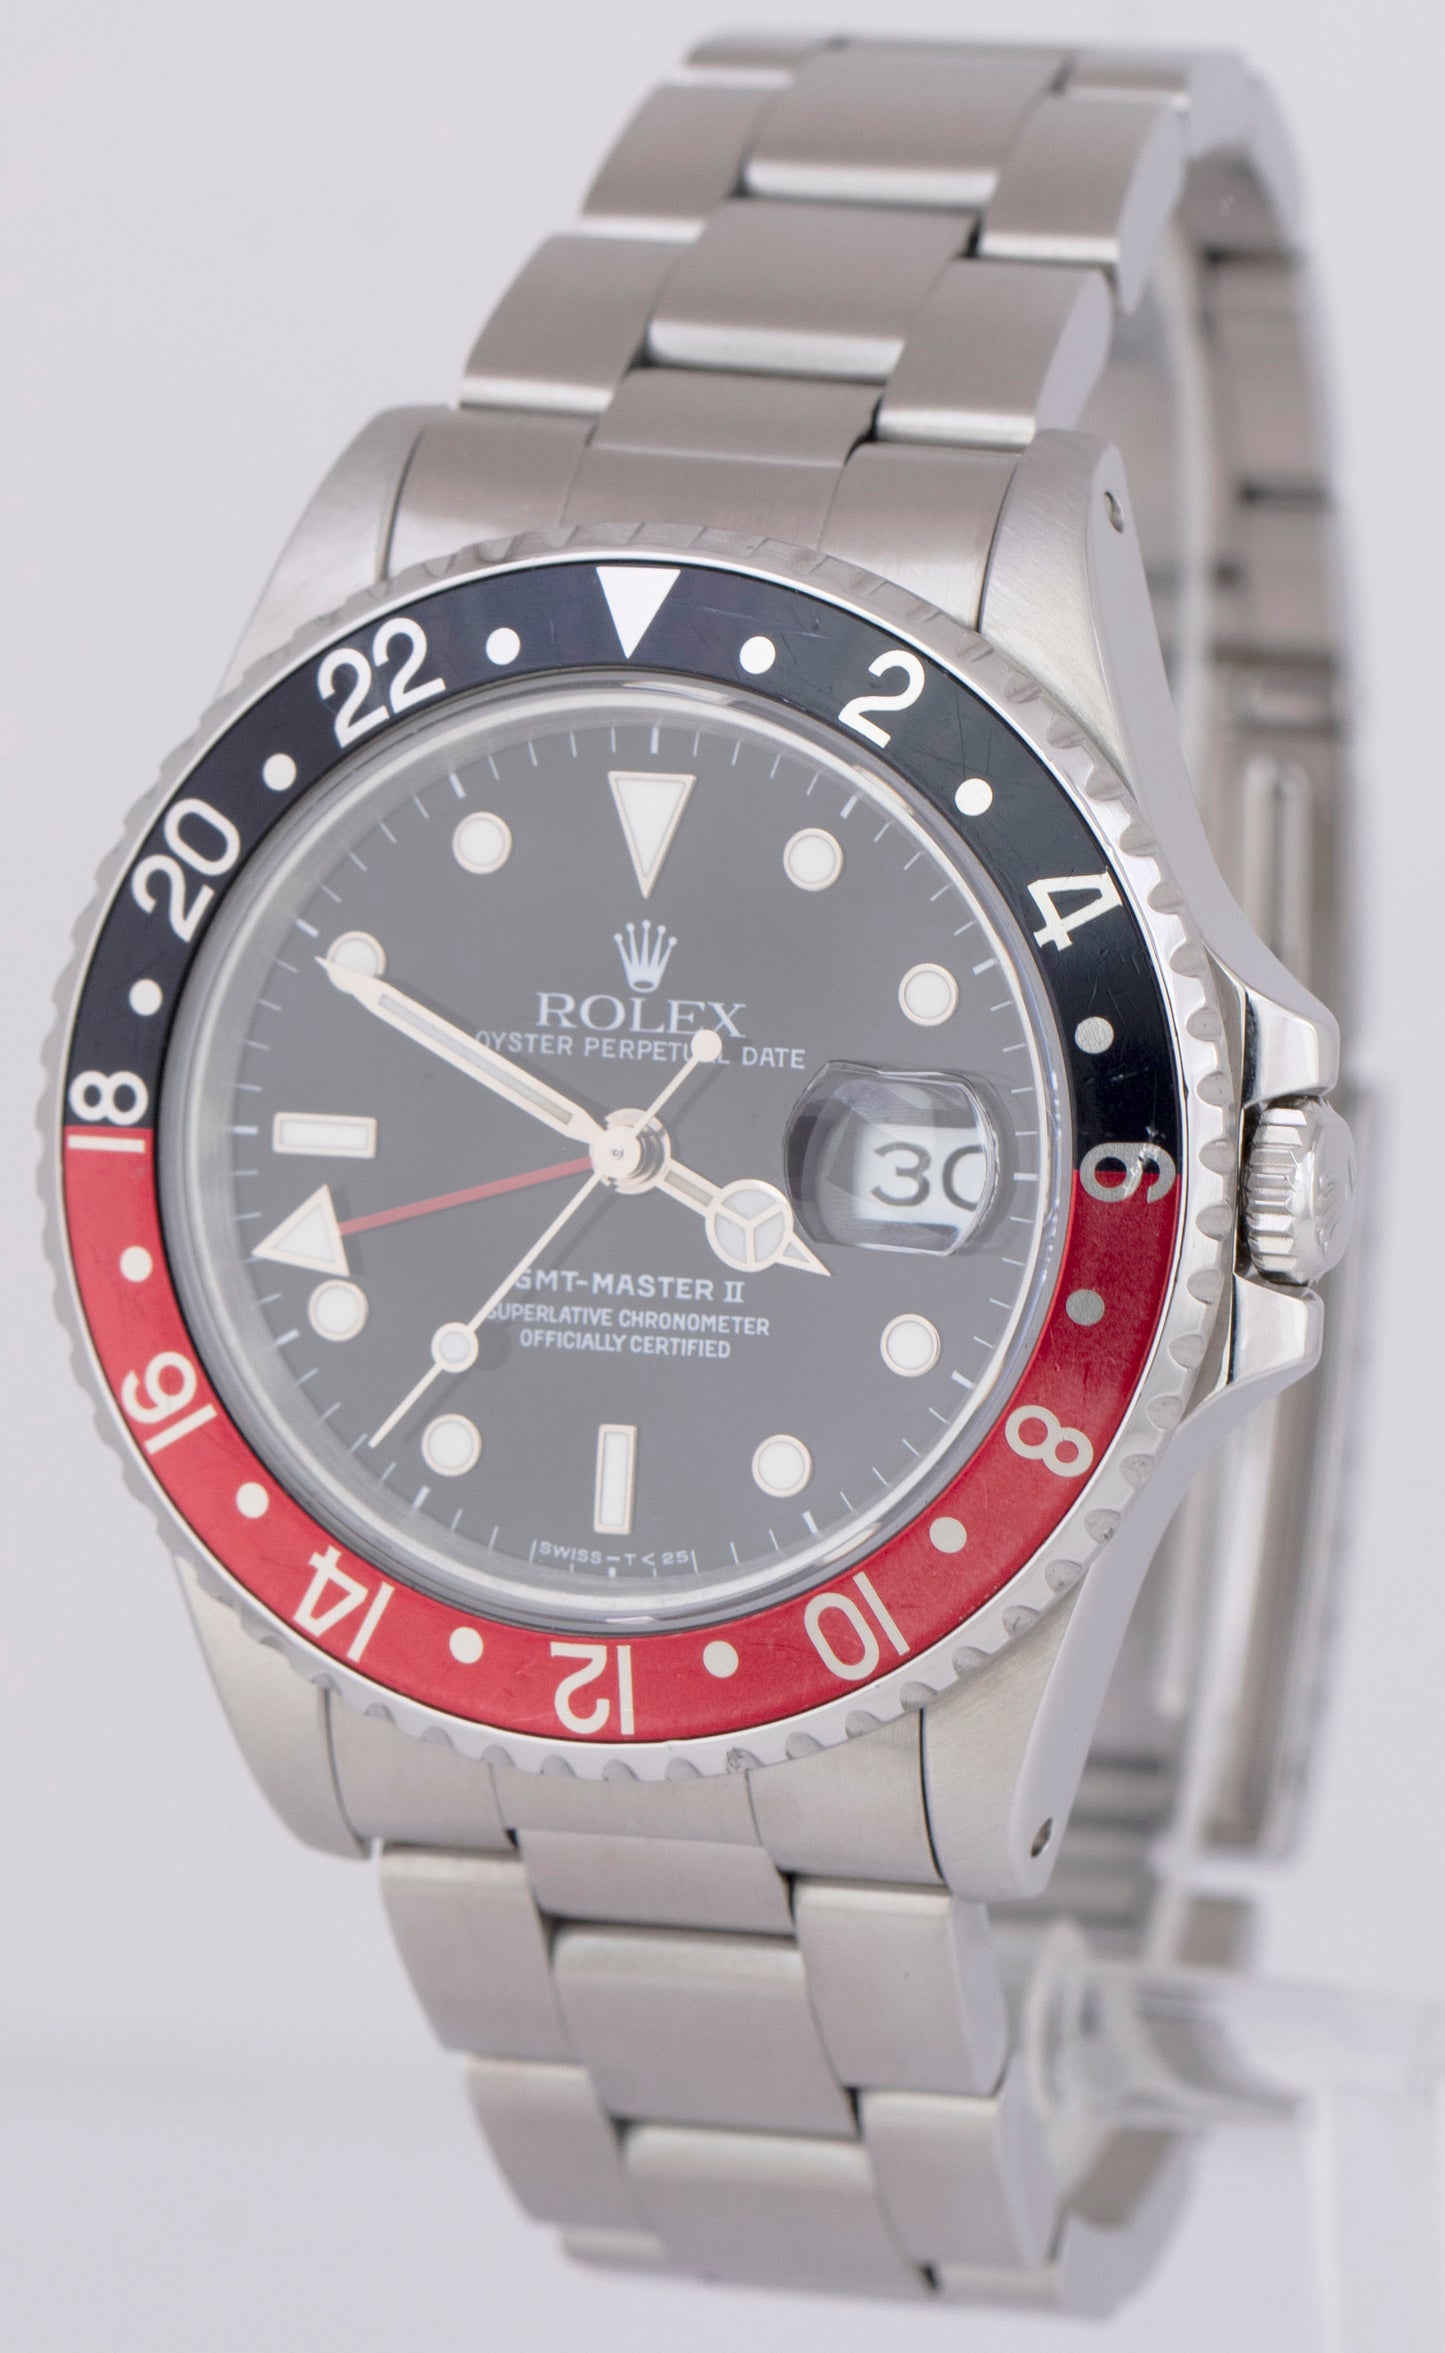 MINT 1989 Rolex GMT-Master II COKE Stainless Steel Black Red Oyster Watch 16710